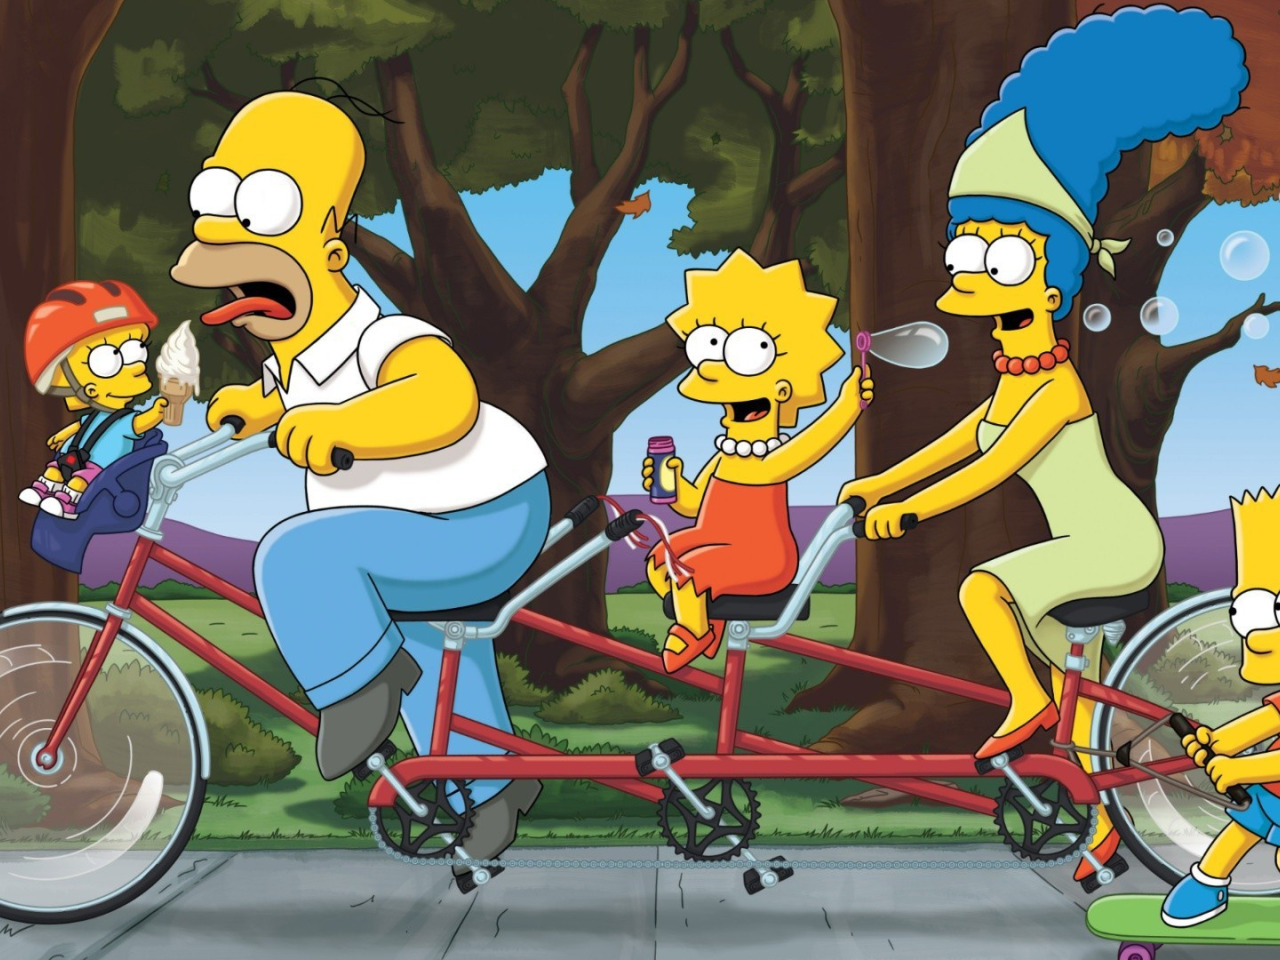 Download wallpaper The simpsons, Figure, Homer, Family, Maggie, Maggie ...